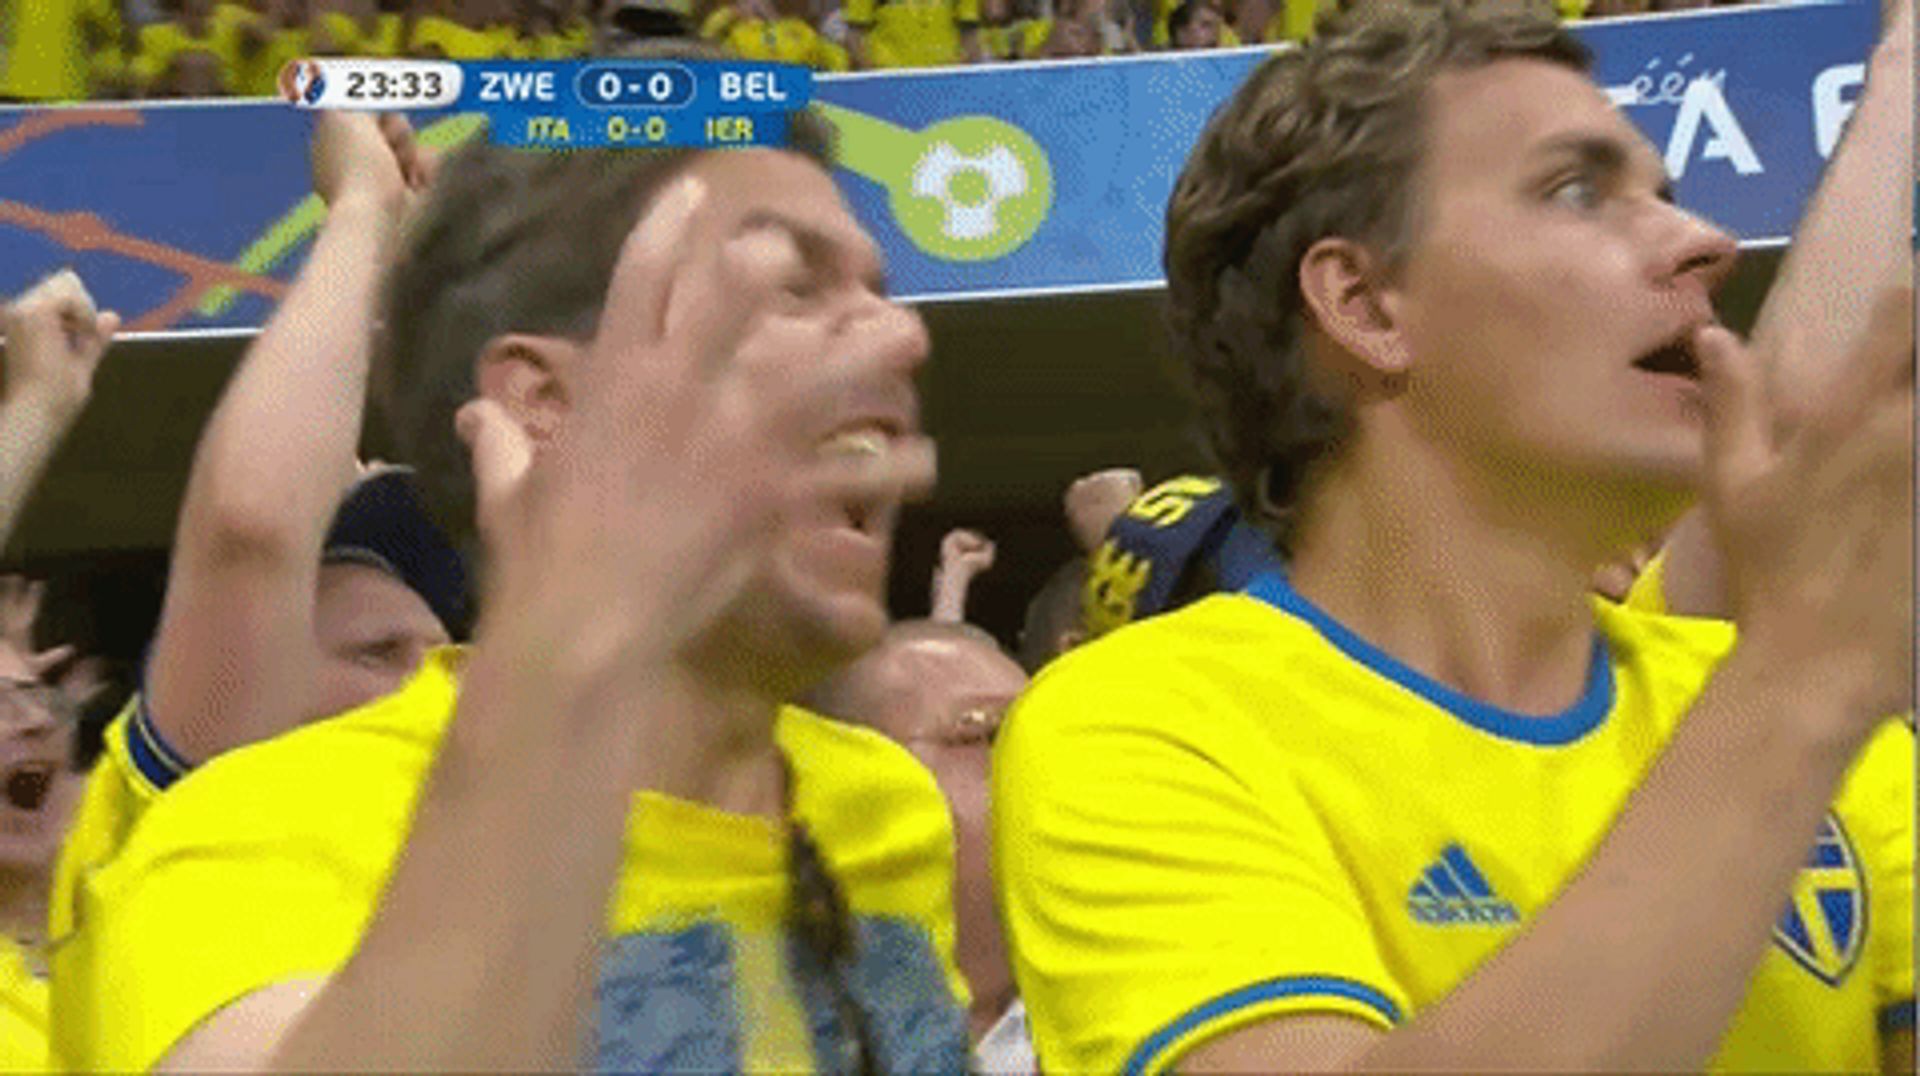 Swedish football fans groaning after Sweden narrowly misses a goal.